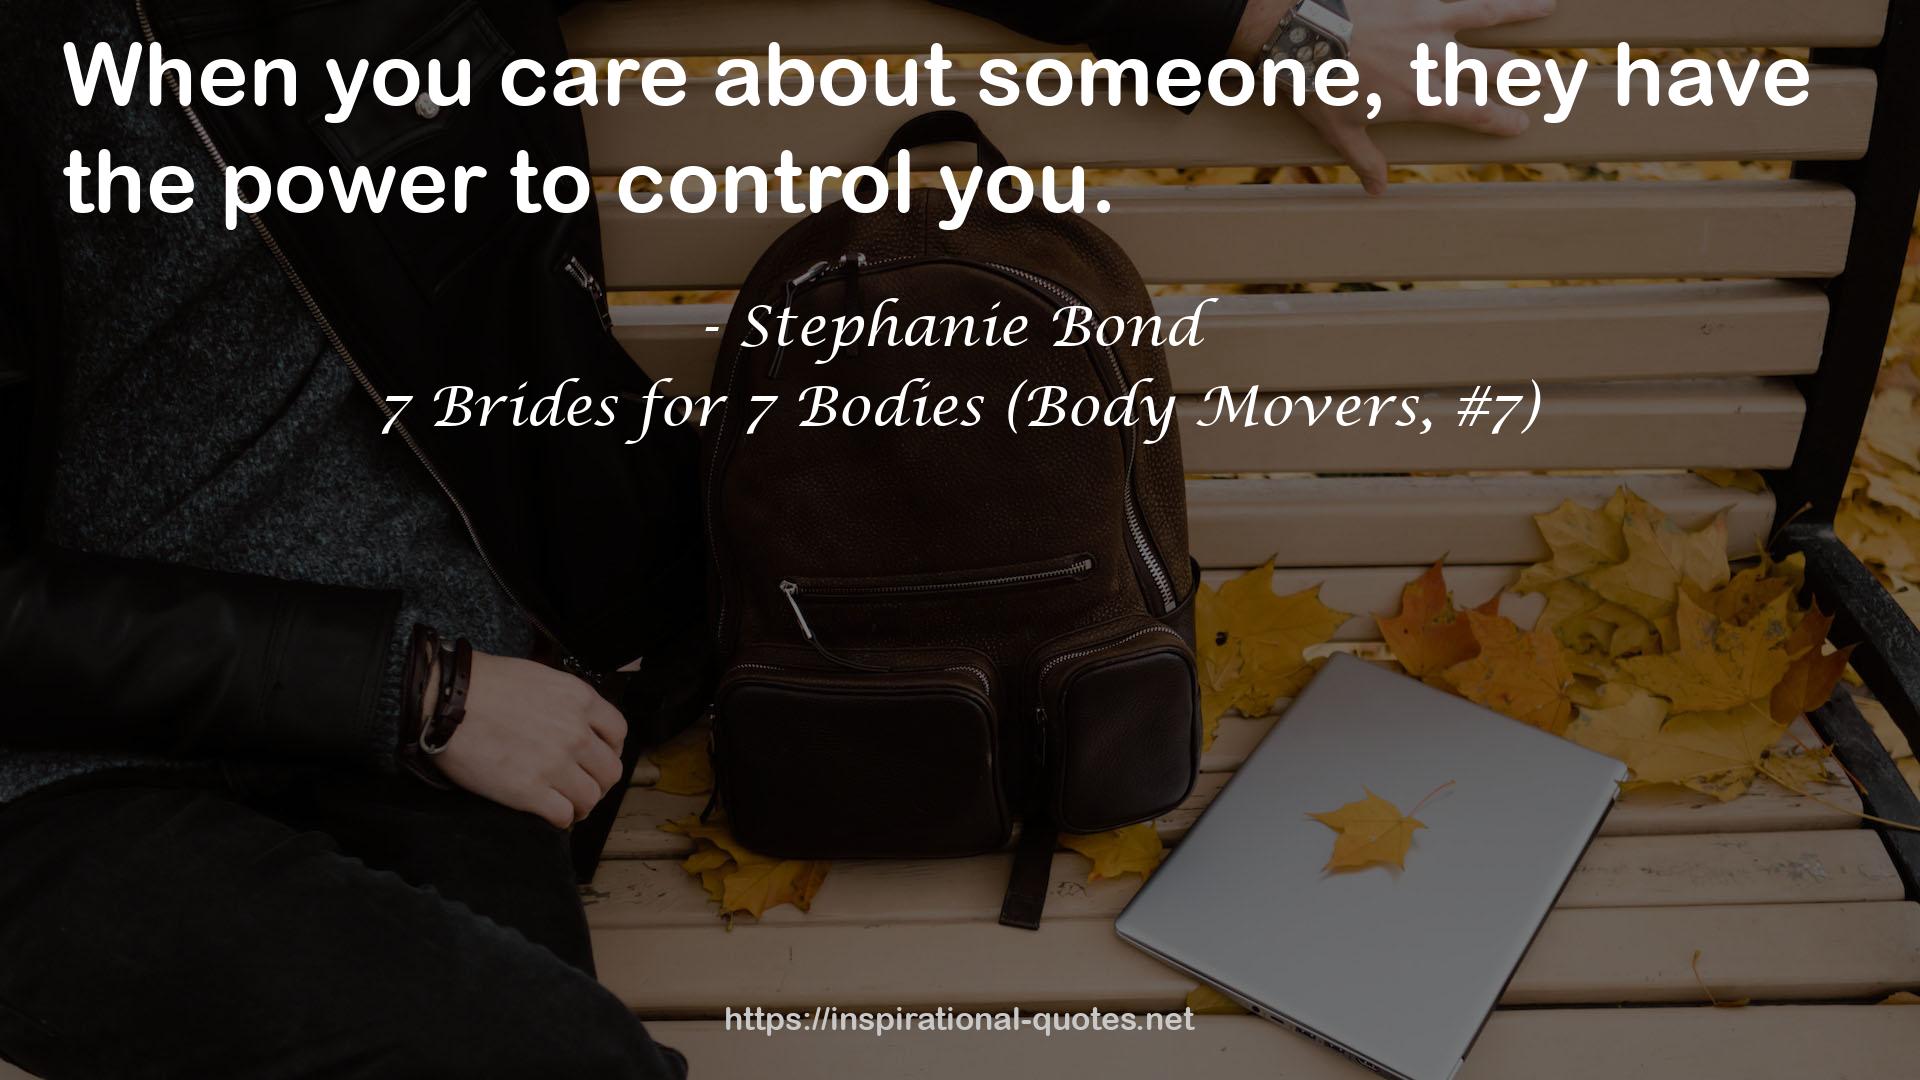 7 Brides for 7 Bodies (Body Movers, #7) QUOTES